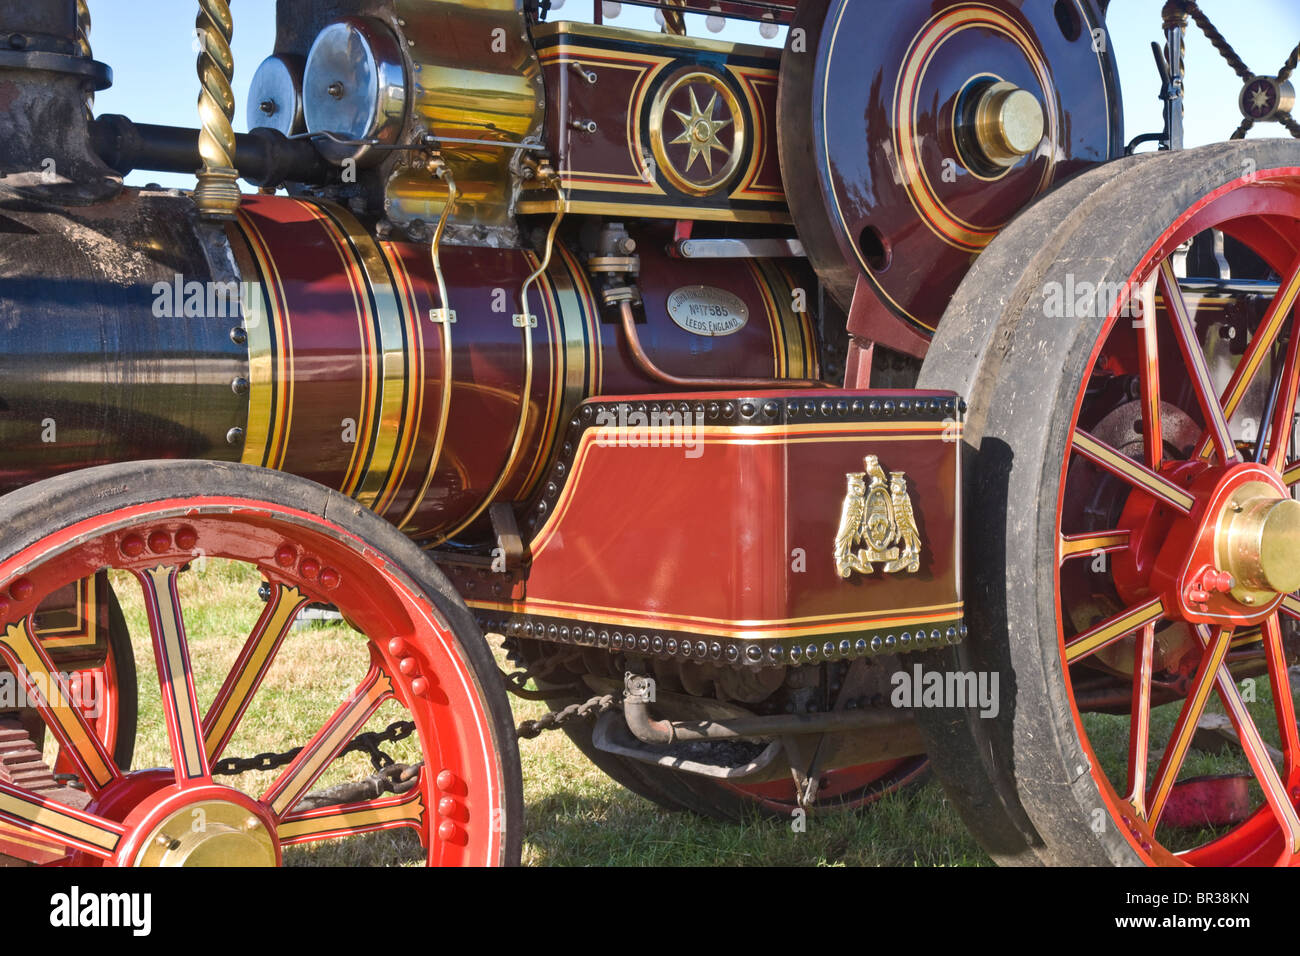 1929 Fowler Showman's Tractor also known as a traction engine or road locomotive. Stock Photo